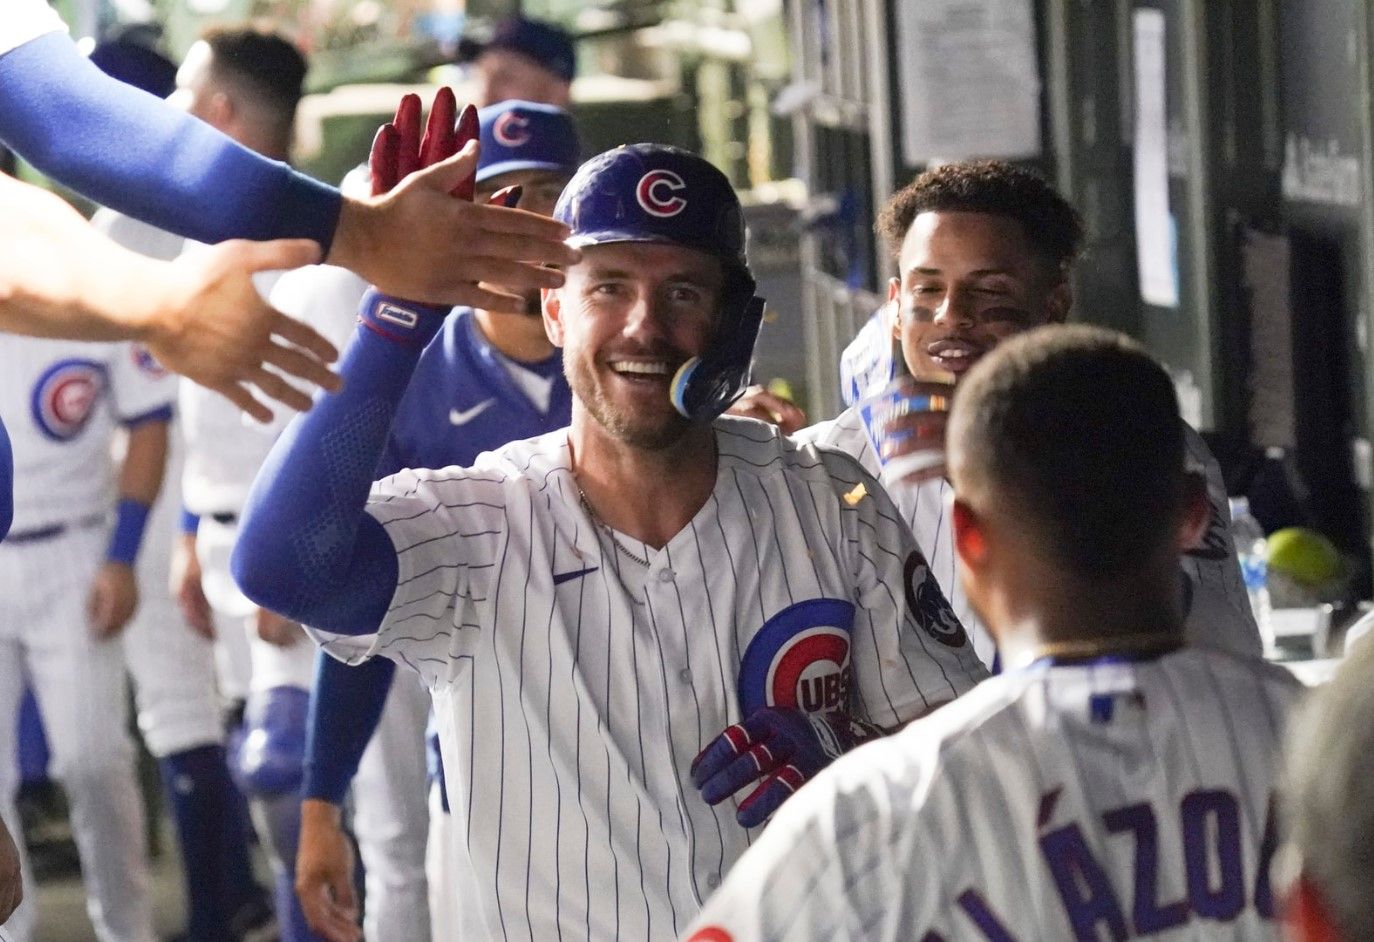 Wisdom homers in 8th inning, Cubs beat Brewers 8-7